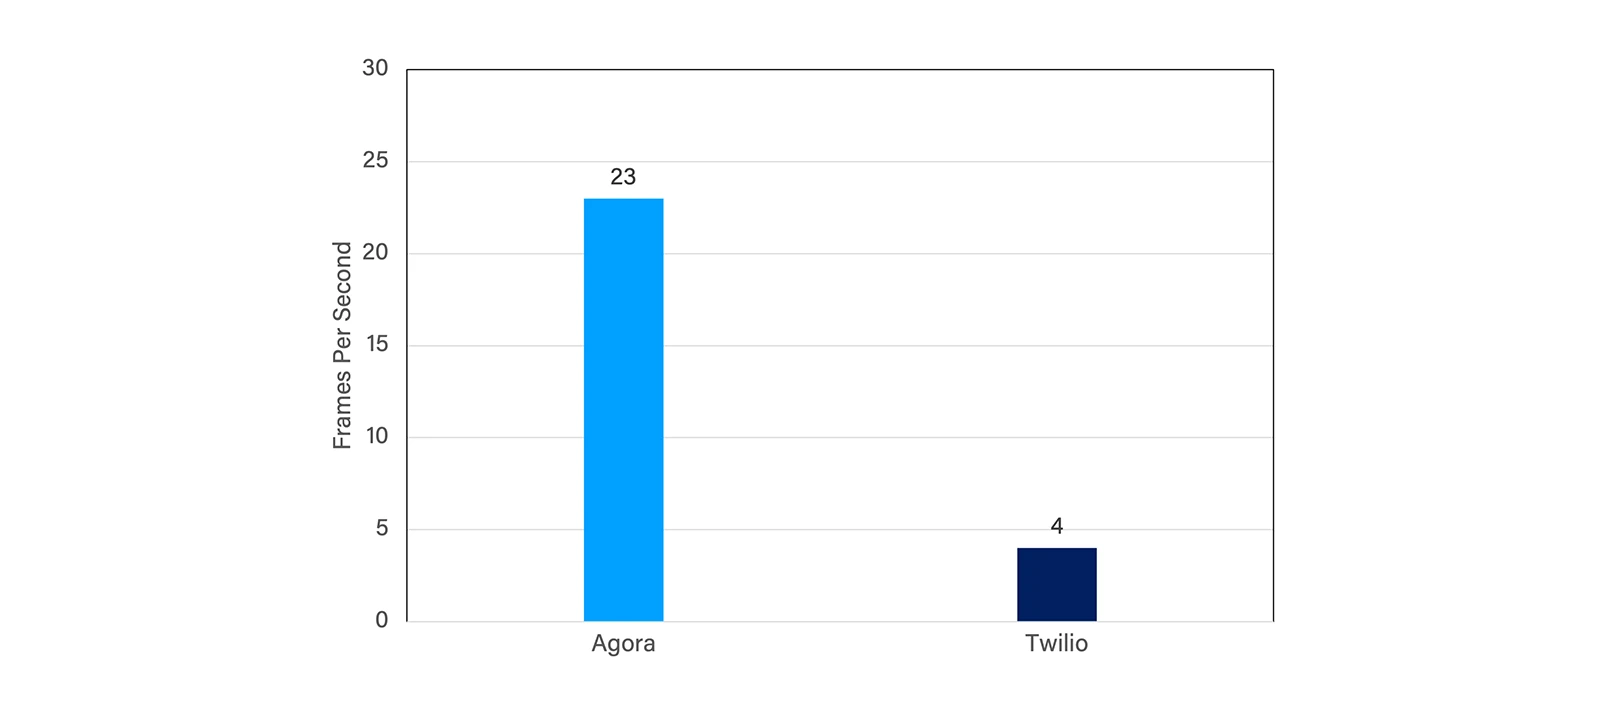 Figure 2: FPS comparison for Agora and Twilio with network having uplink packet loss of 25%.